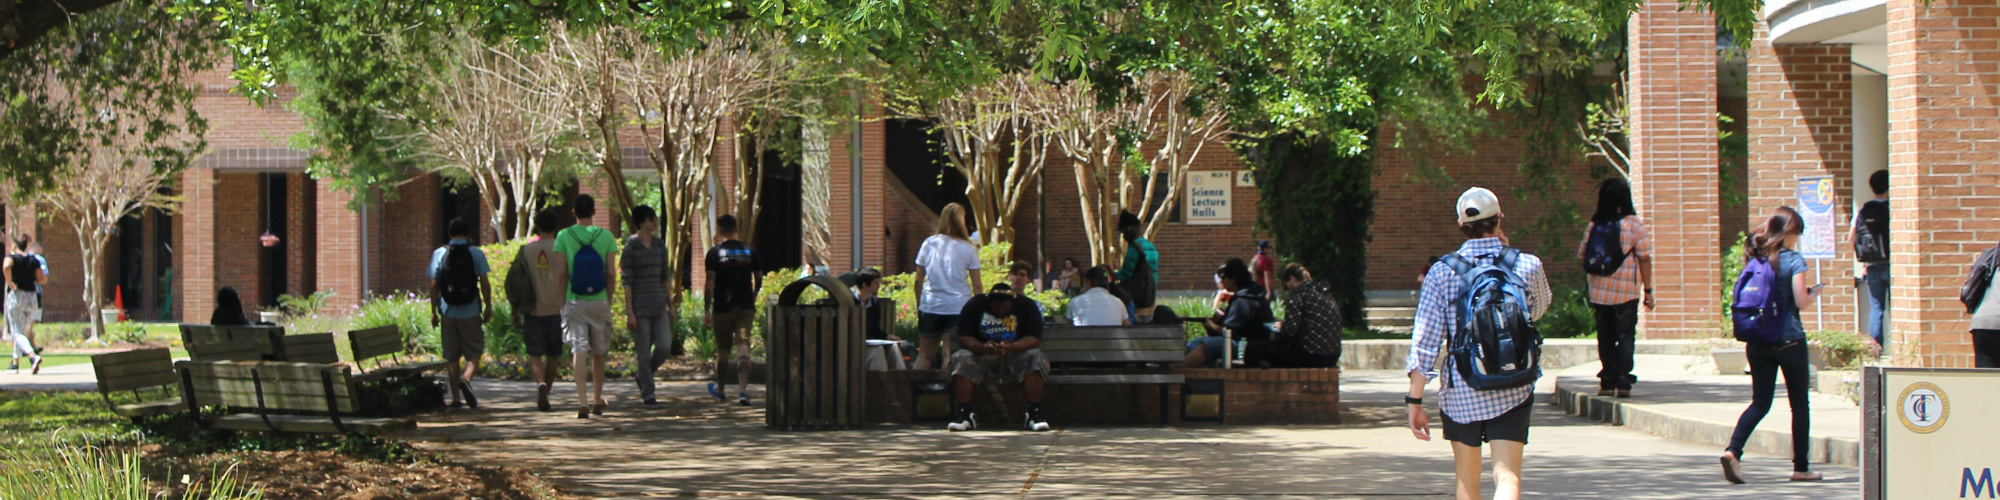 Busy campus walkway with students near SM building